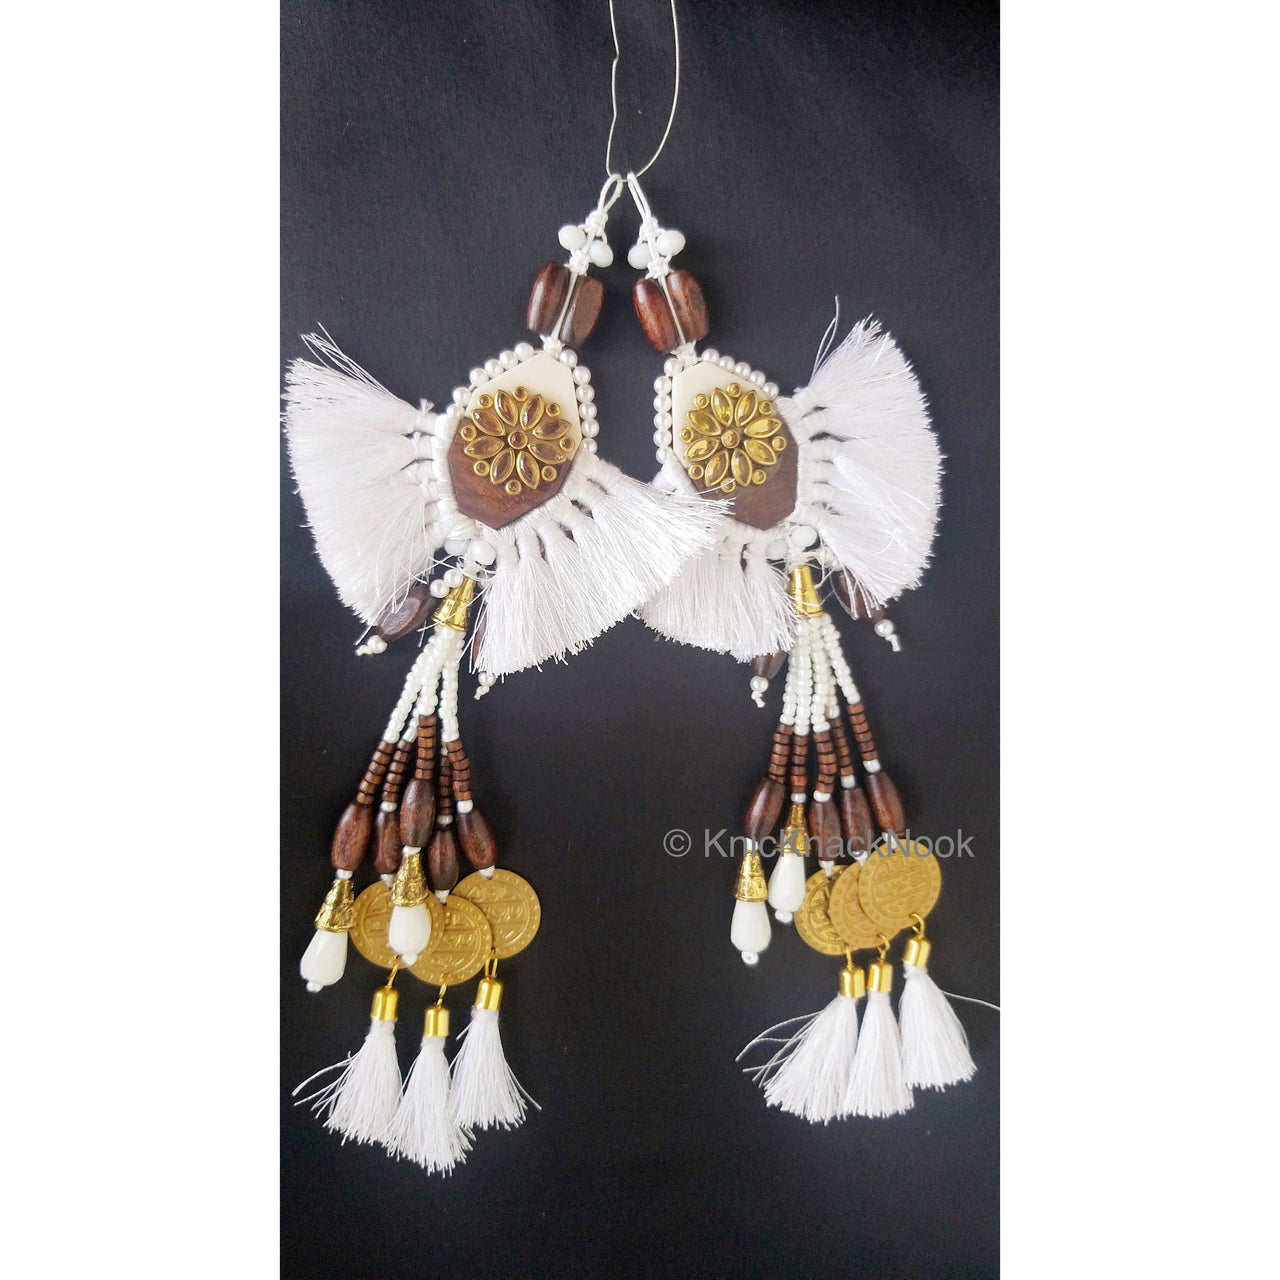 White Tassels With White Acrylic And Brown Wood Button In Kundan Stones, Wood Beads, Pearls